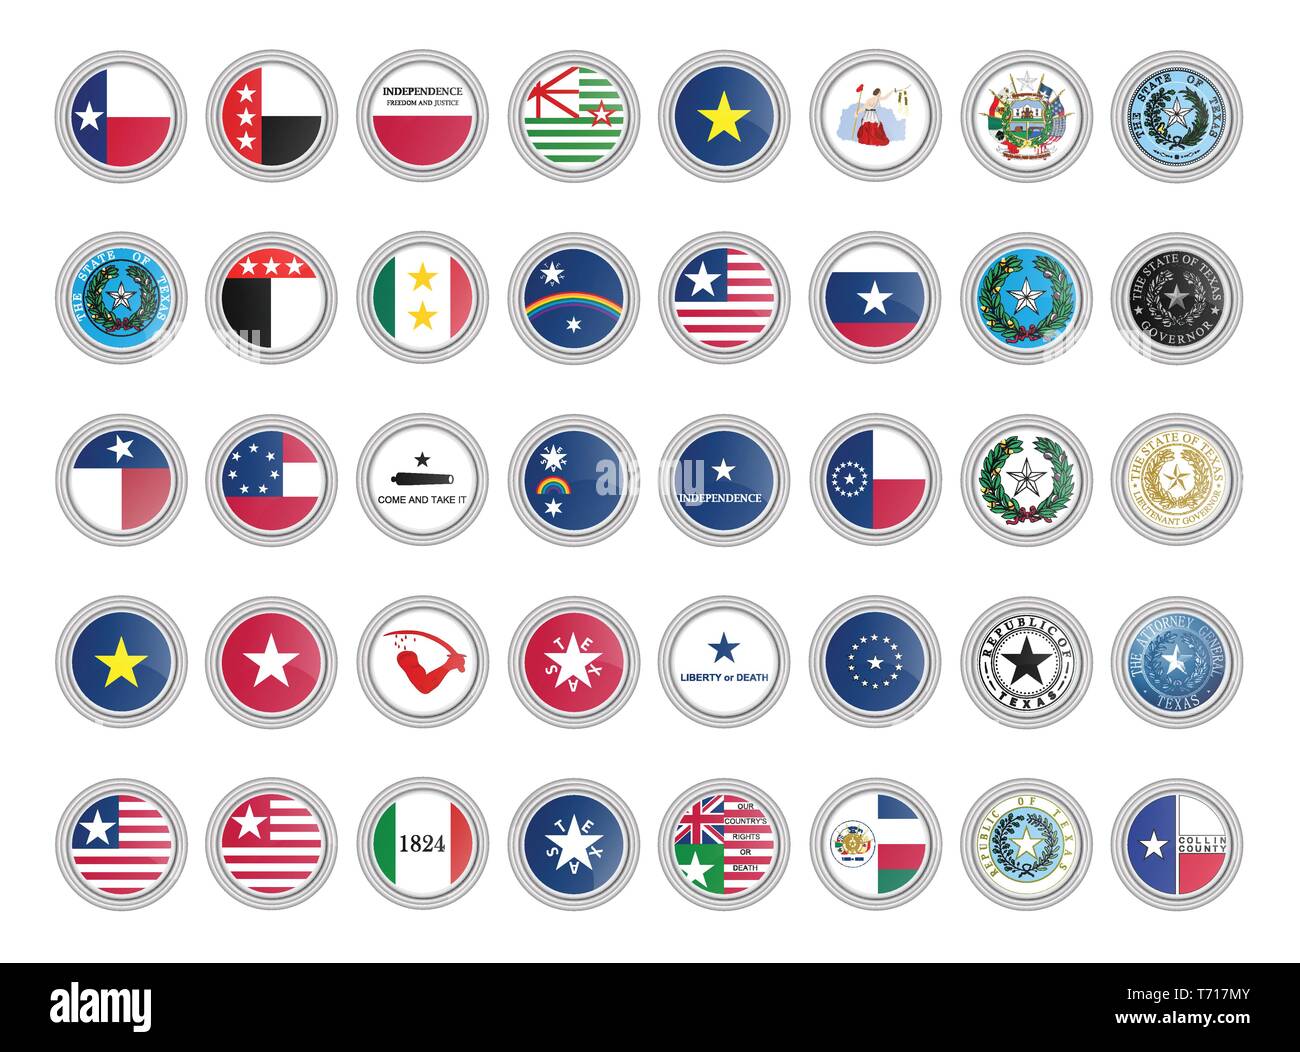 Set of vector icons. Flags and seals of Texas state, USA. 3D illustration. Stock Vector